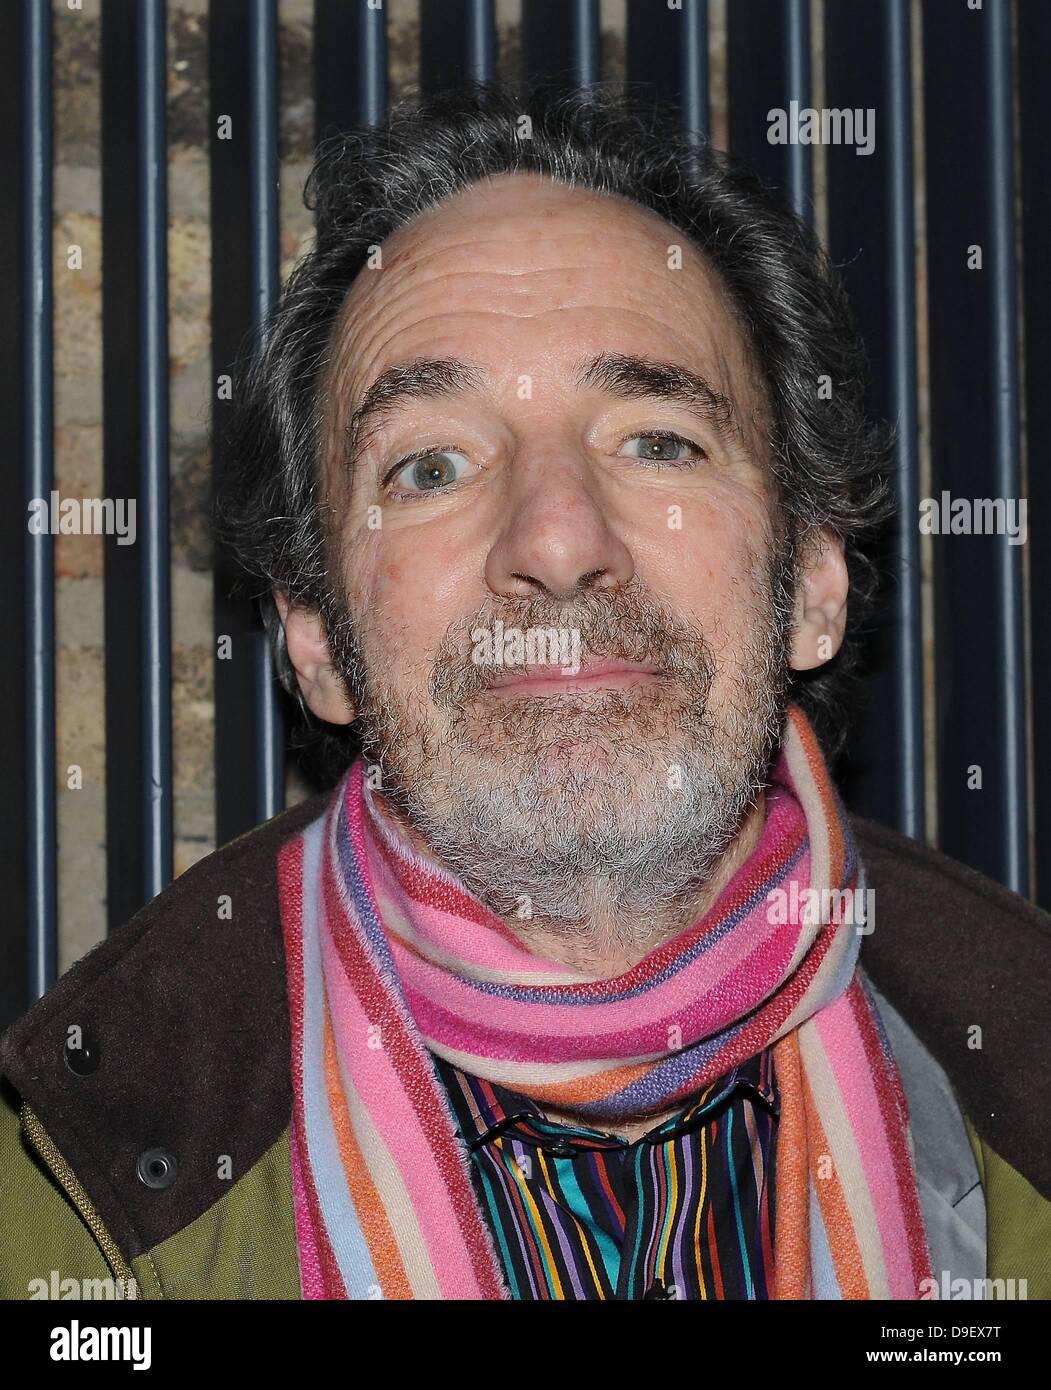 Harry Shearer The voice behind The Simpsons characters Mr. Burns, Smithers, Ned Flanders at a screening of 'The Big Uneasy' at the IFI as part of the Jameson Dublin International Film Festival Dublin, Ireland - 22.02.11 Stock Photo